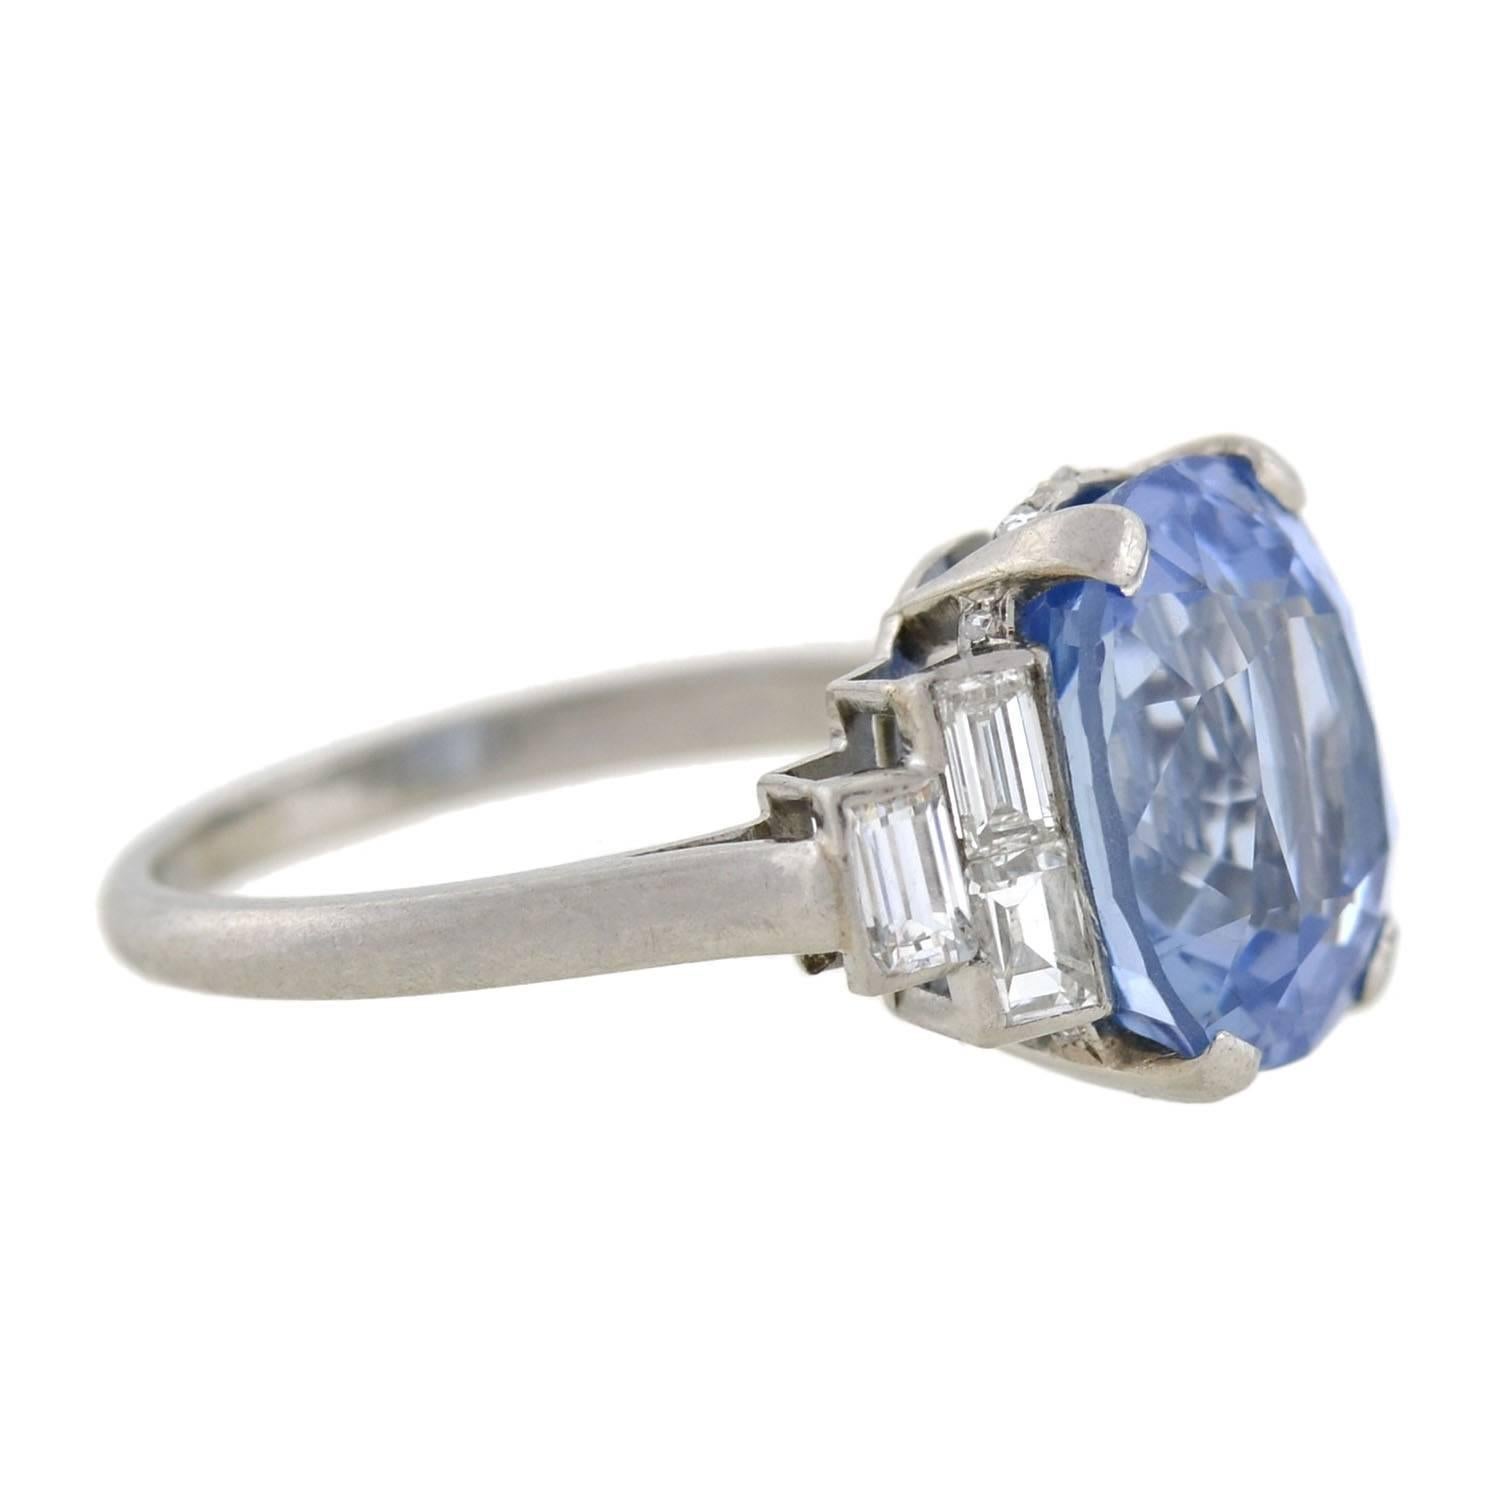 A stunning sapphire and diamond ring from the late Art Deco (ca1930) era! Made of platinum, this exquisite ring holds a cushion cut sapphire at the center, framed by baguette diamonds at either shoulder. The sapphire weighs 7.11ct and has a gorgeous